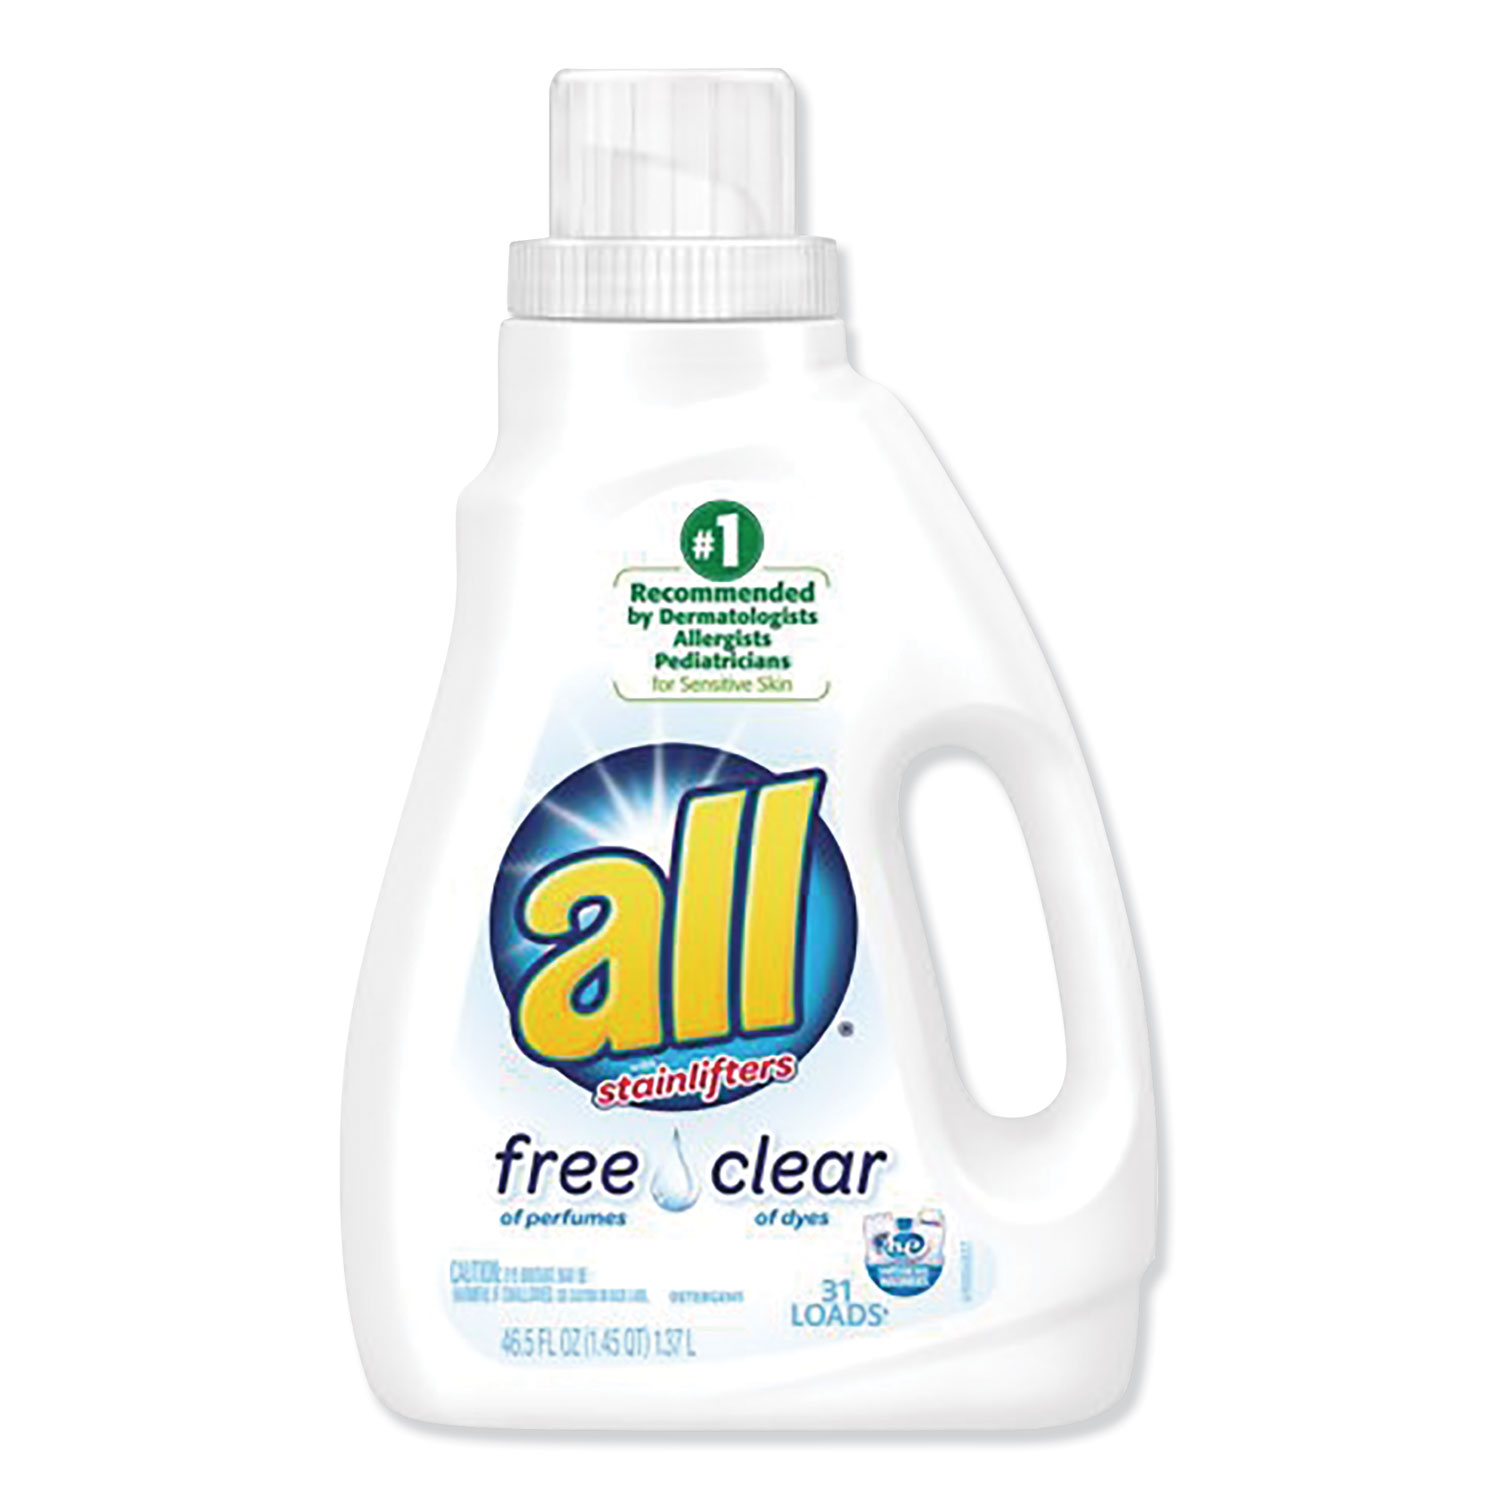  All 46155CT Liquid Laundry Detergent Free Clear for Sensitive Skin, 46.5 oz Bottle, 6/Carton (DIA46155CT) 